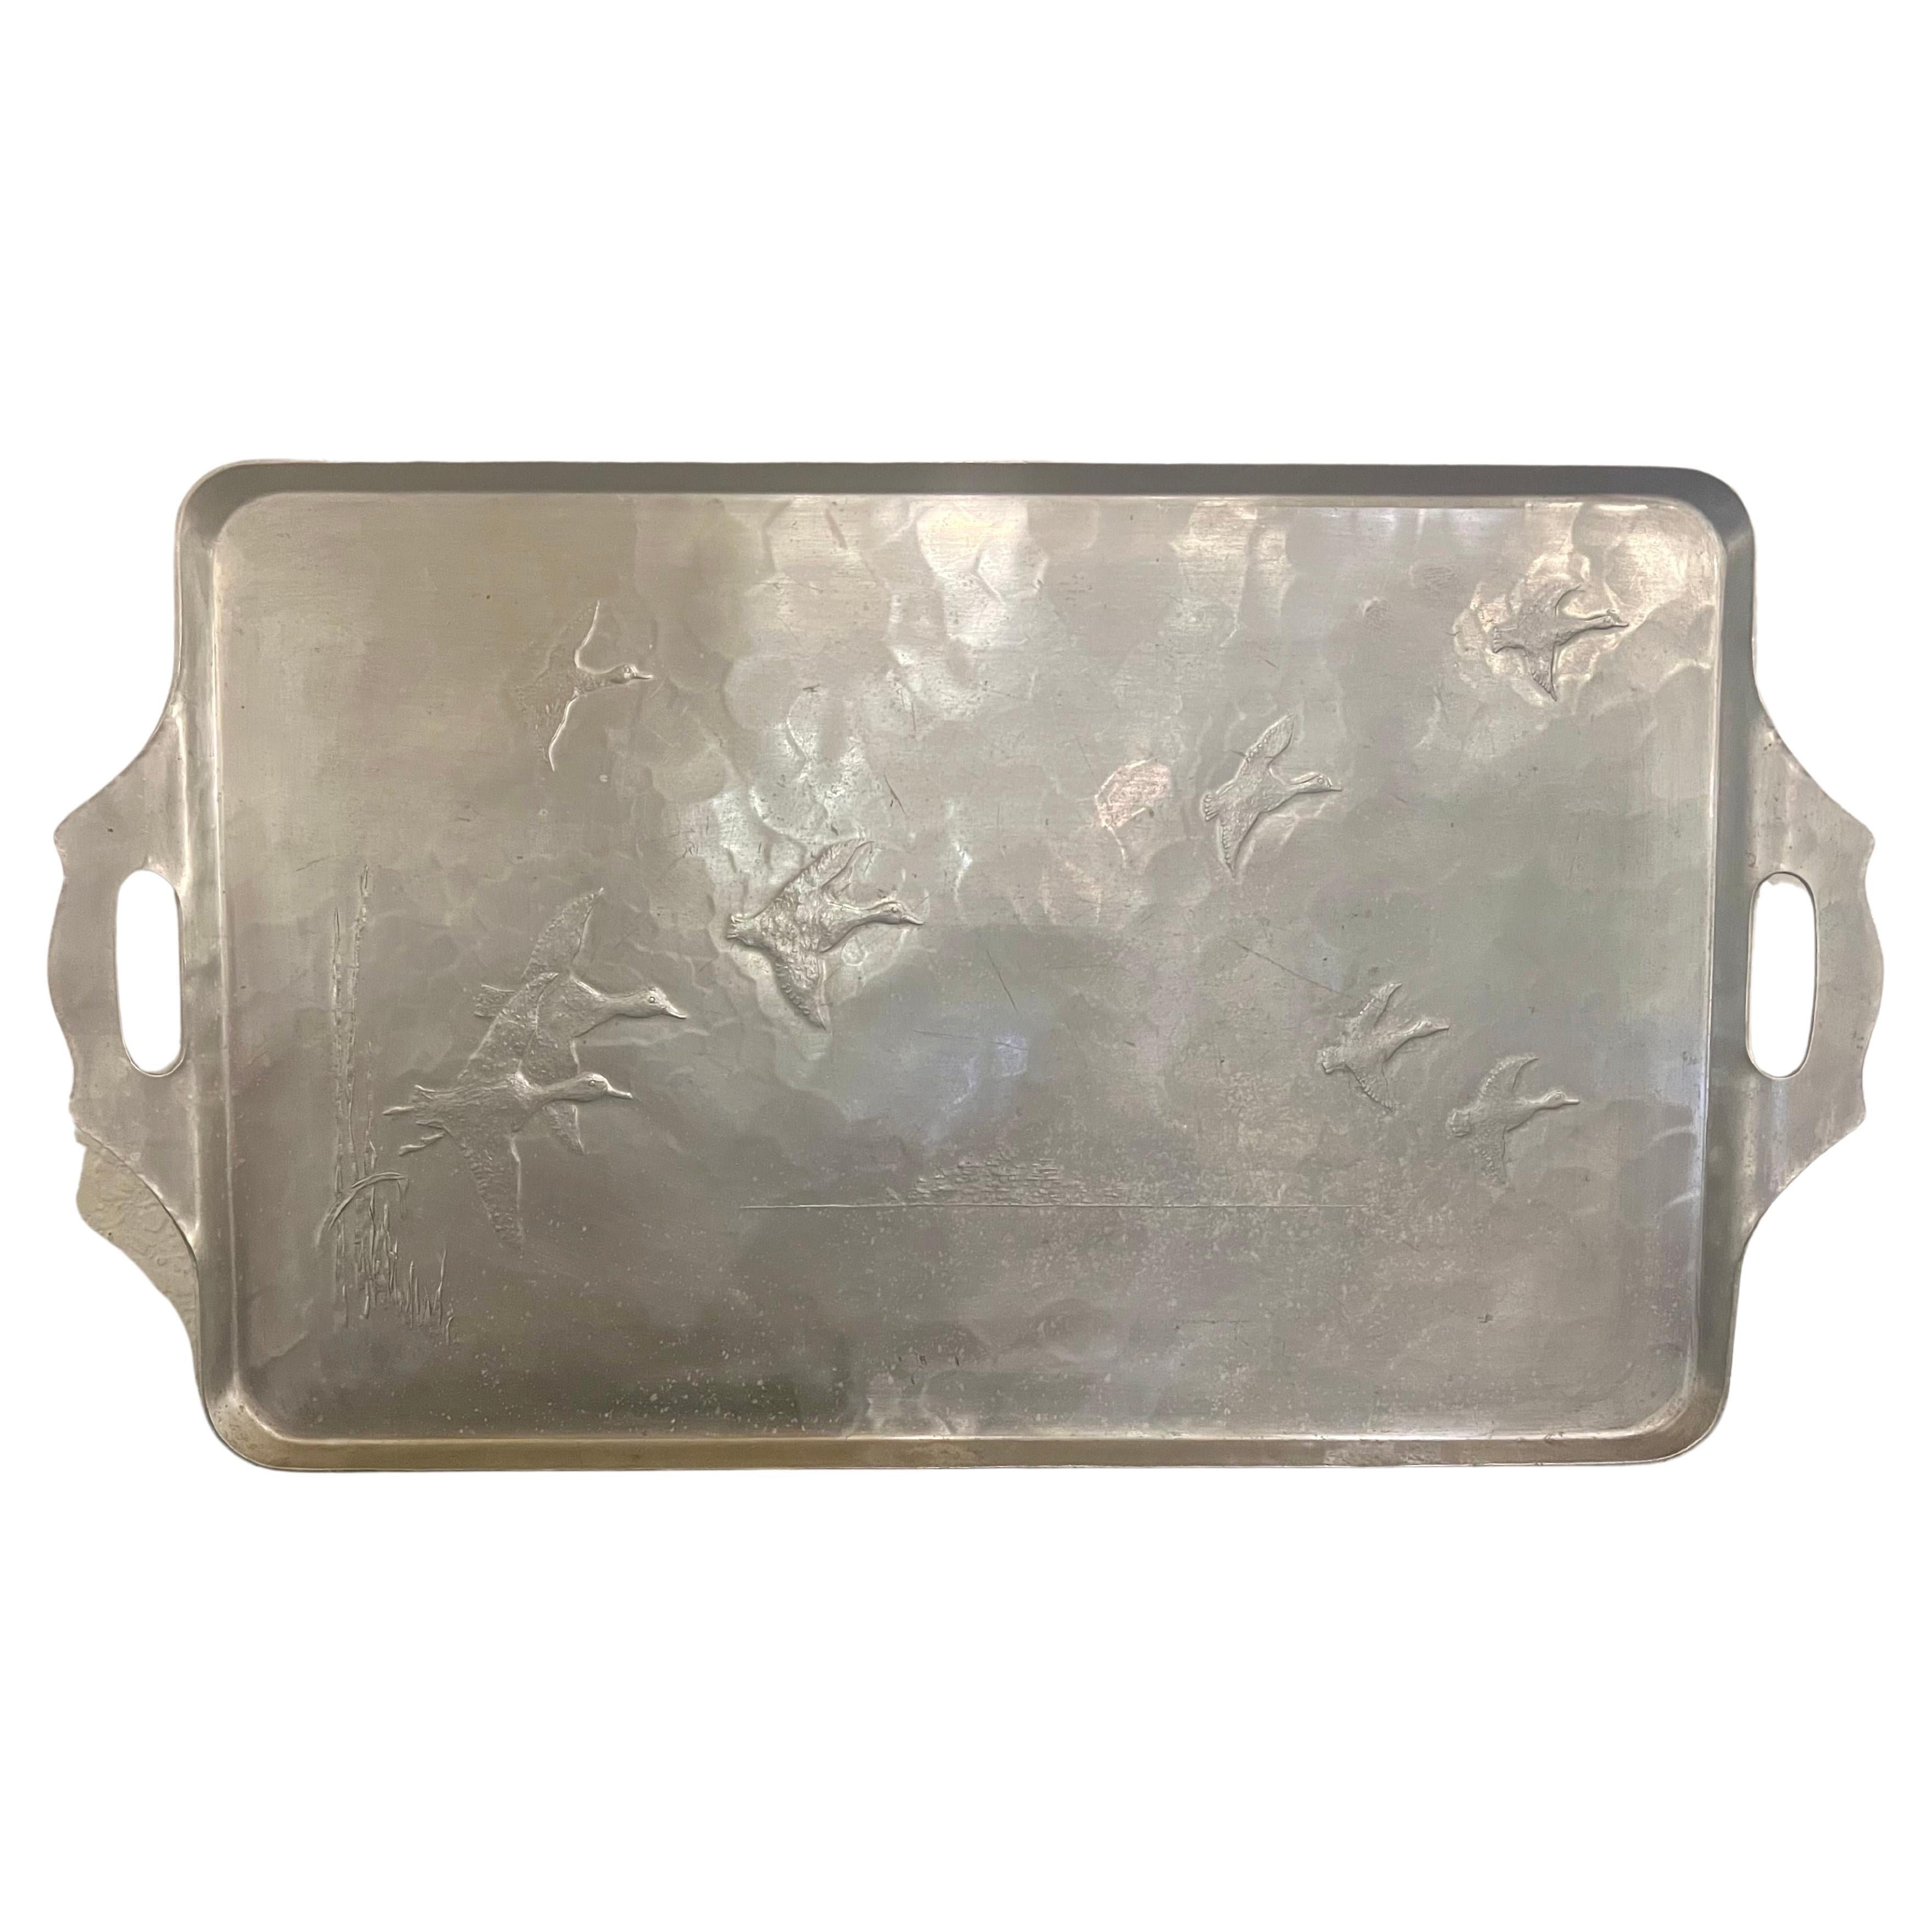 1940s Wendell August Forge Aluminium Tray with Handles Ducks Engraved For Sale